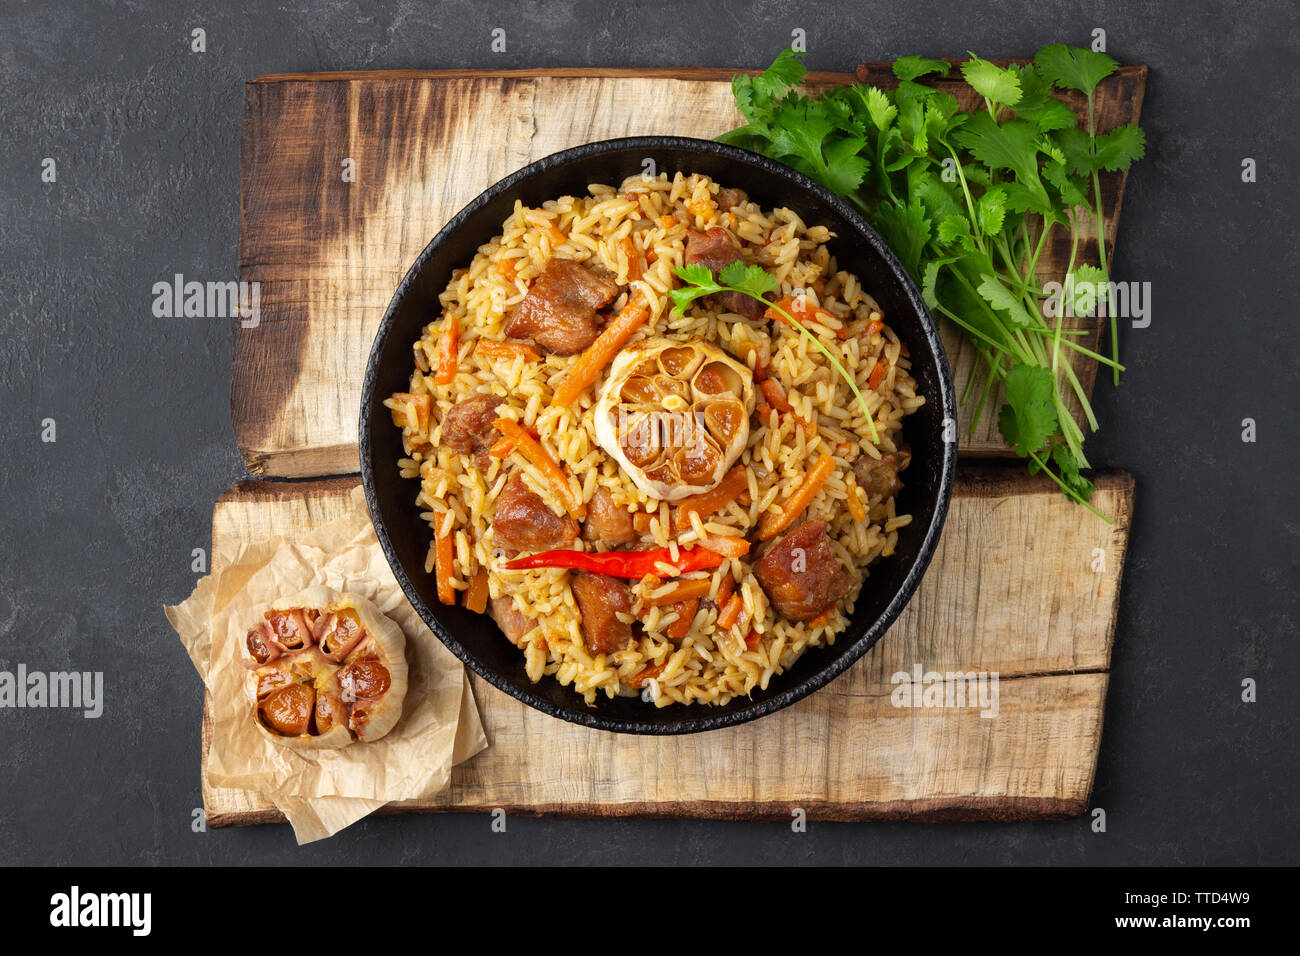 Oriental cuisine. Uzbek pilaf or plov from rice and meat in a cast iron pan on wooden rustic board. Top view. Stock Photo